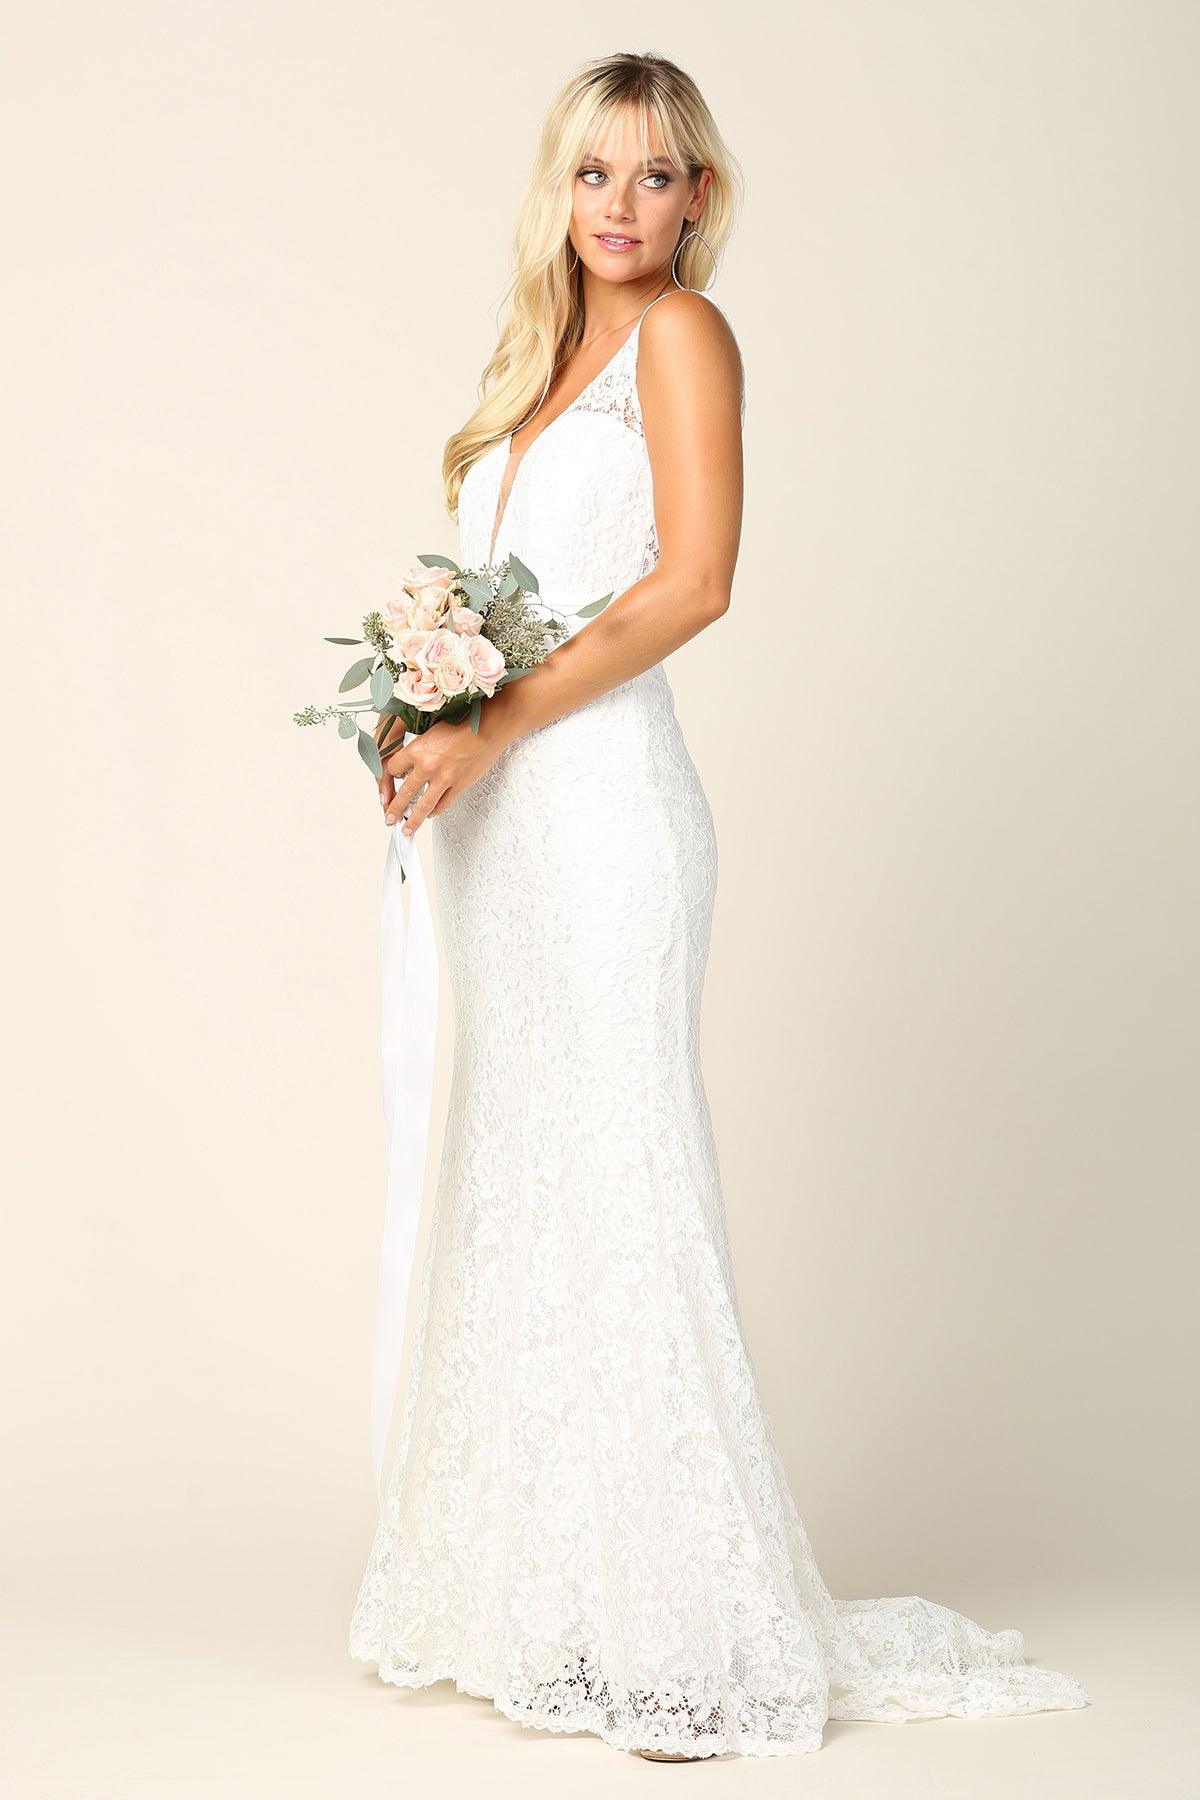 Bridal Long Sleeveless Lace Wedding Dress Sale - The Dress Outlet